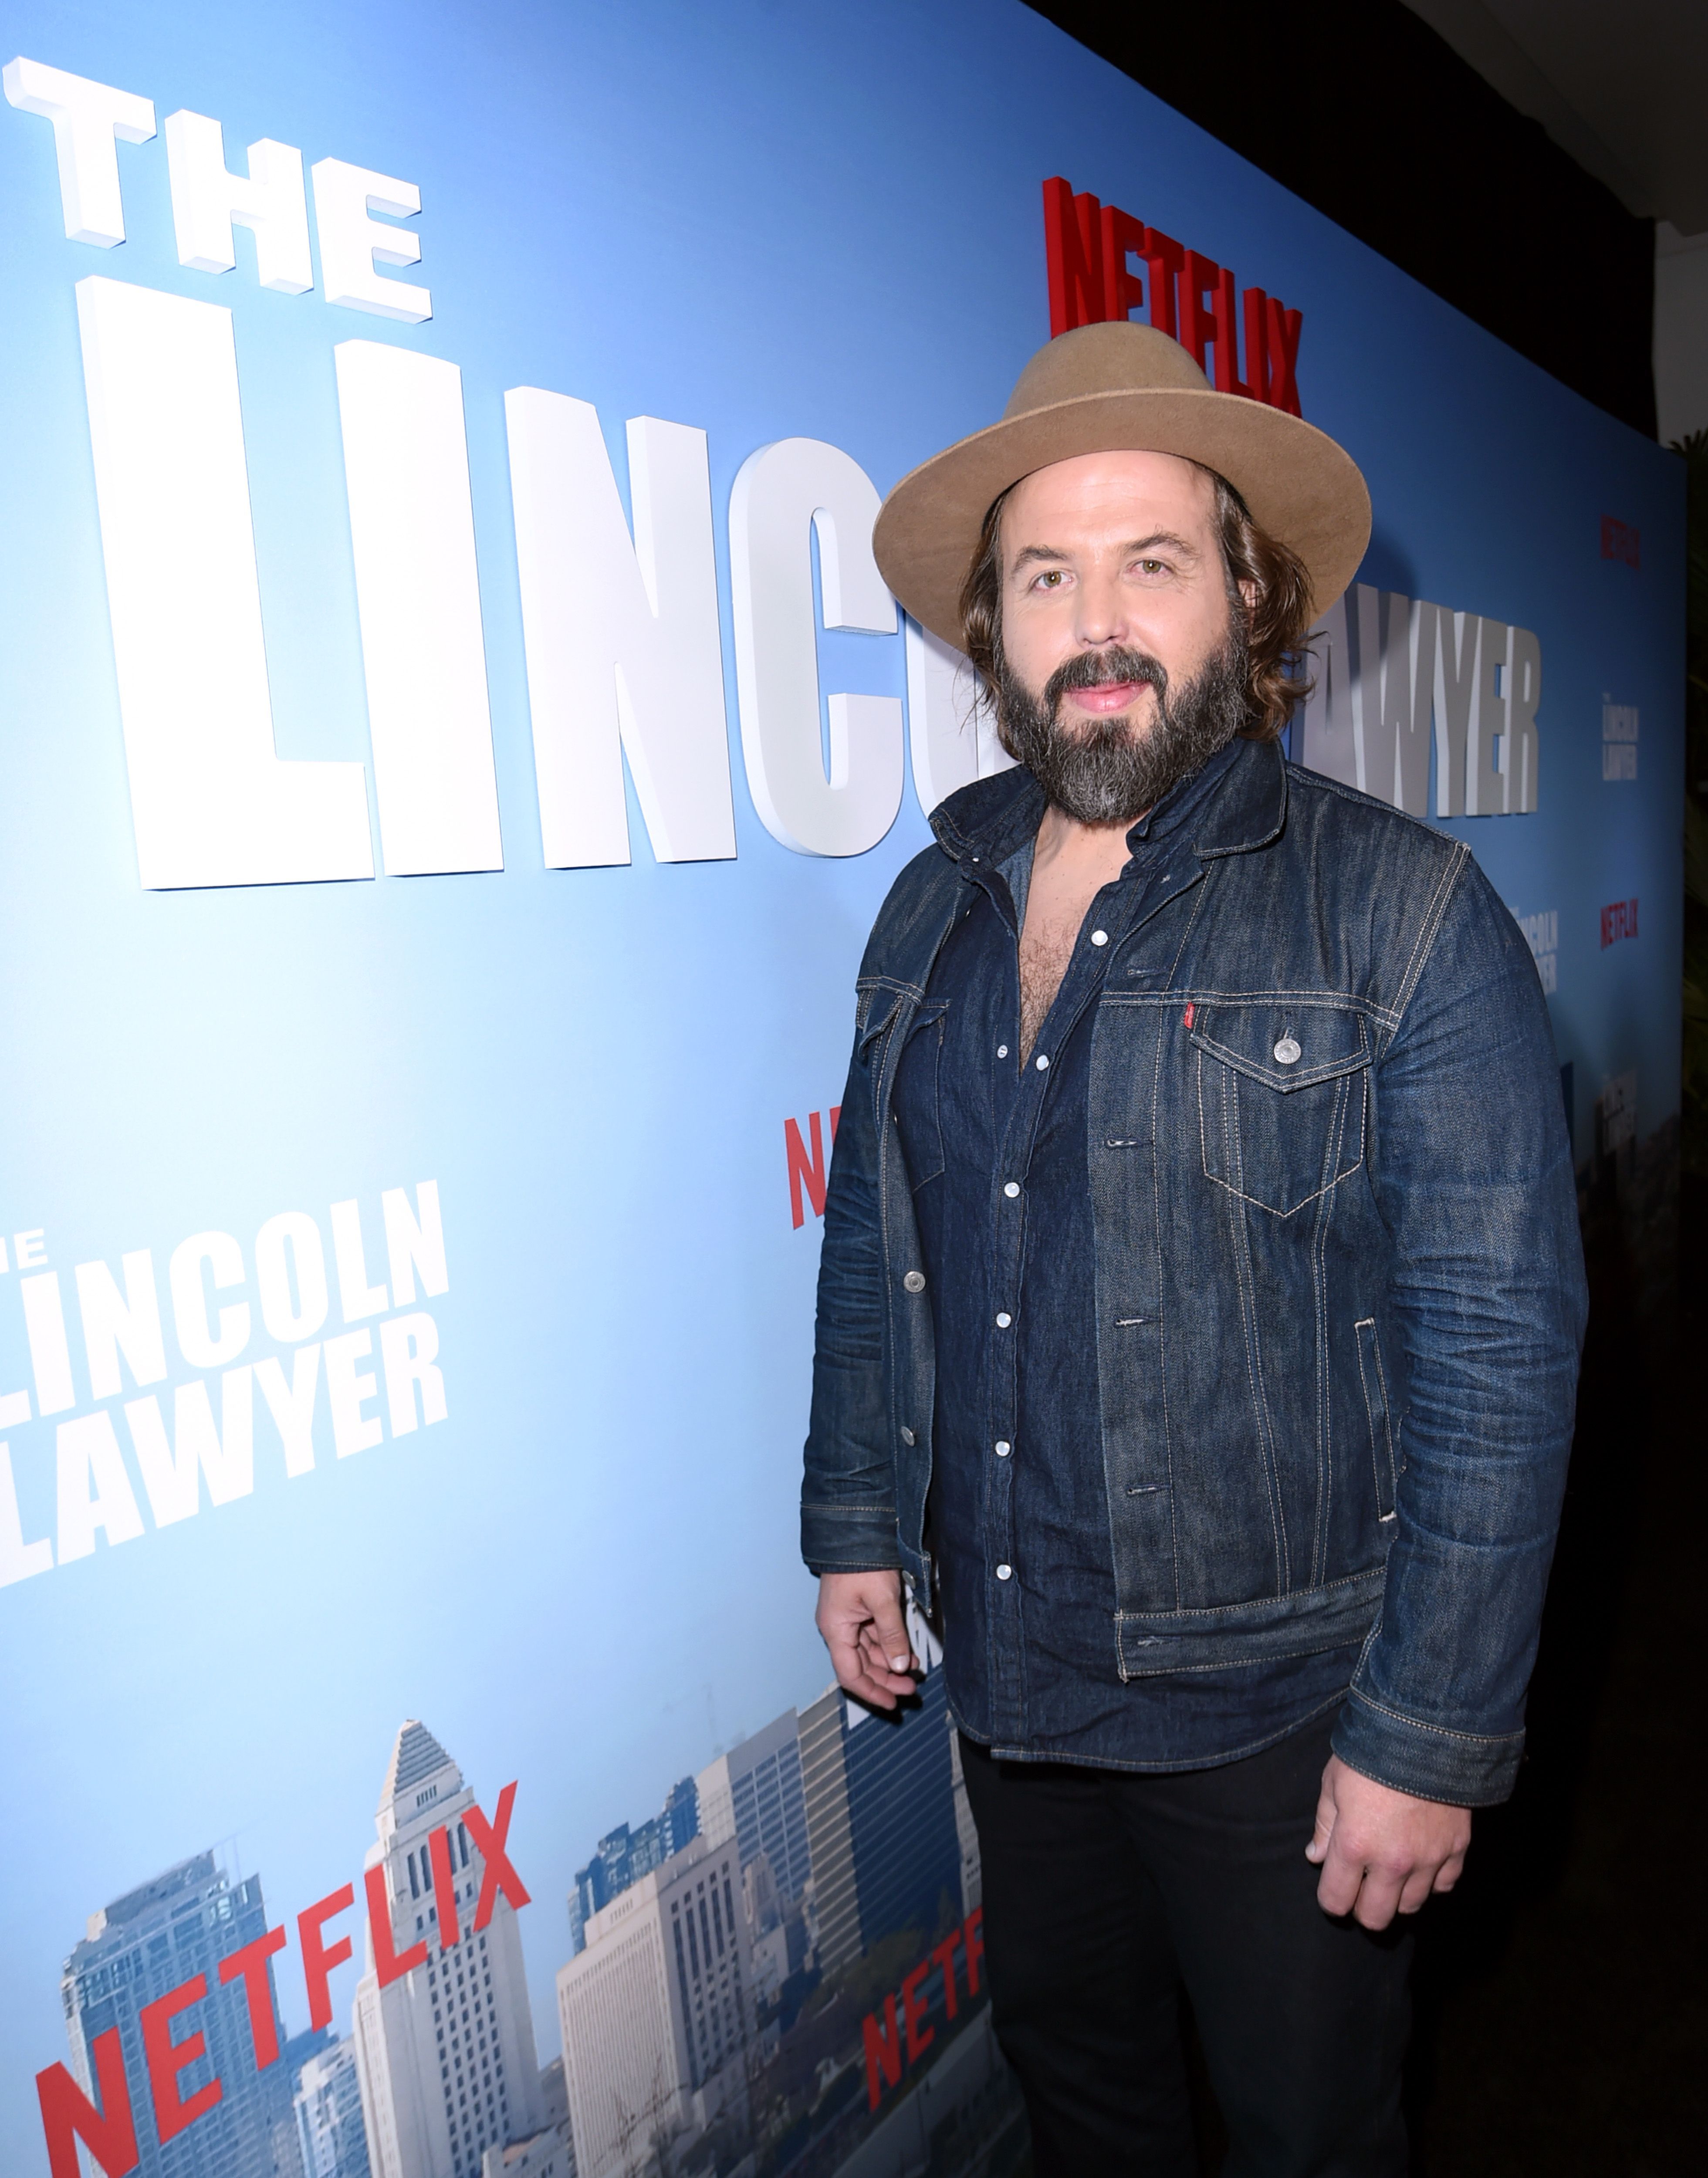 Angus Sampson at the screening of "The Lincoln Lawyer" on May 9, 2022, in Los Angeles, California. | Source: Getty Images